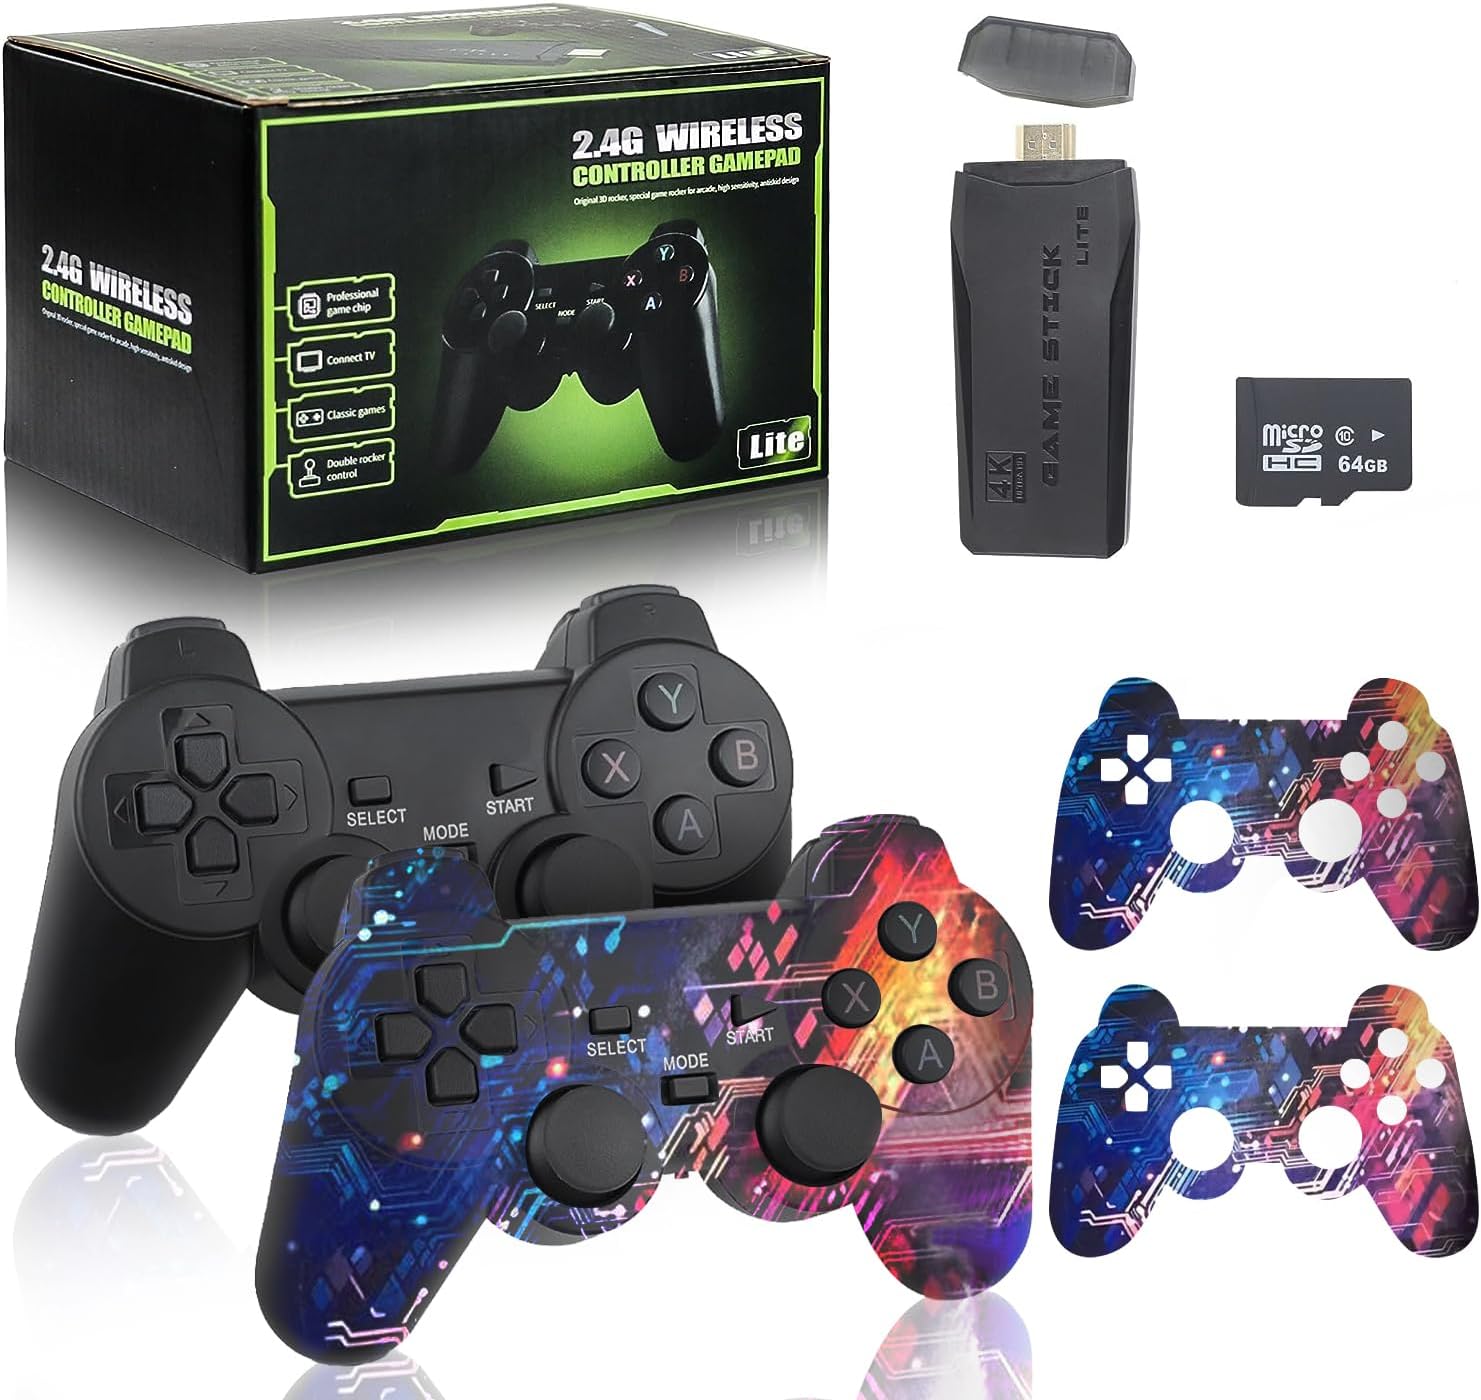 Video Game Consoles & Accessories